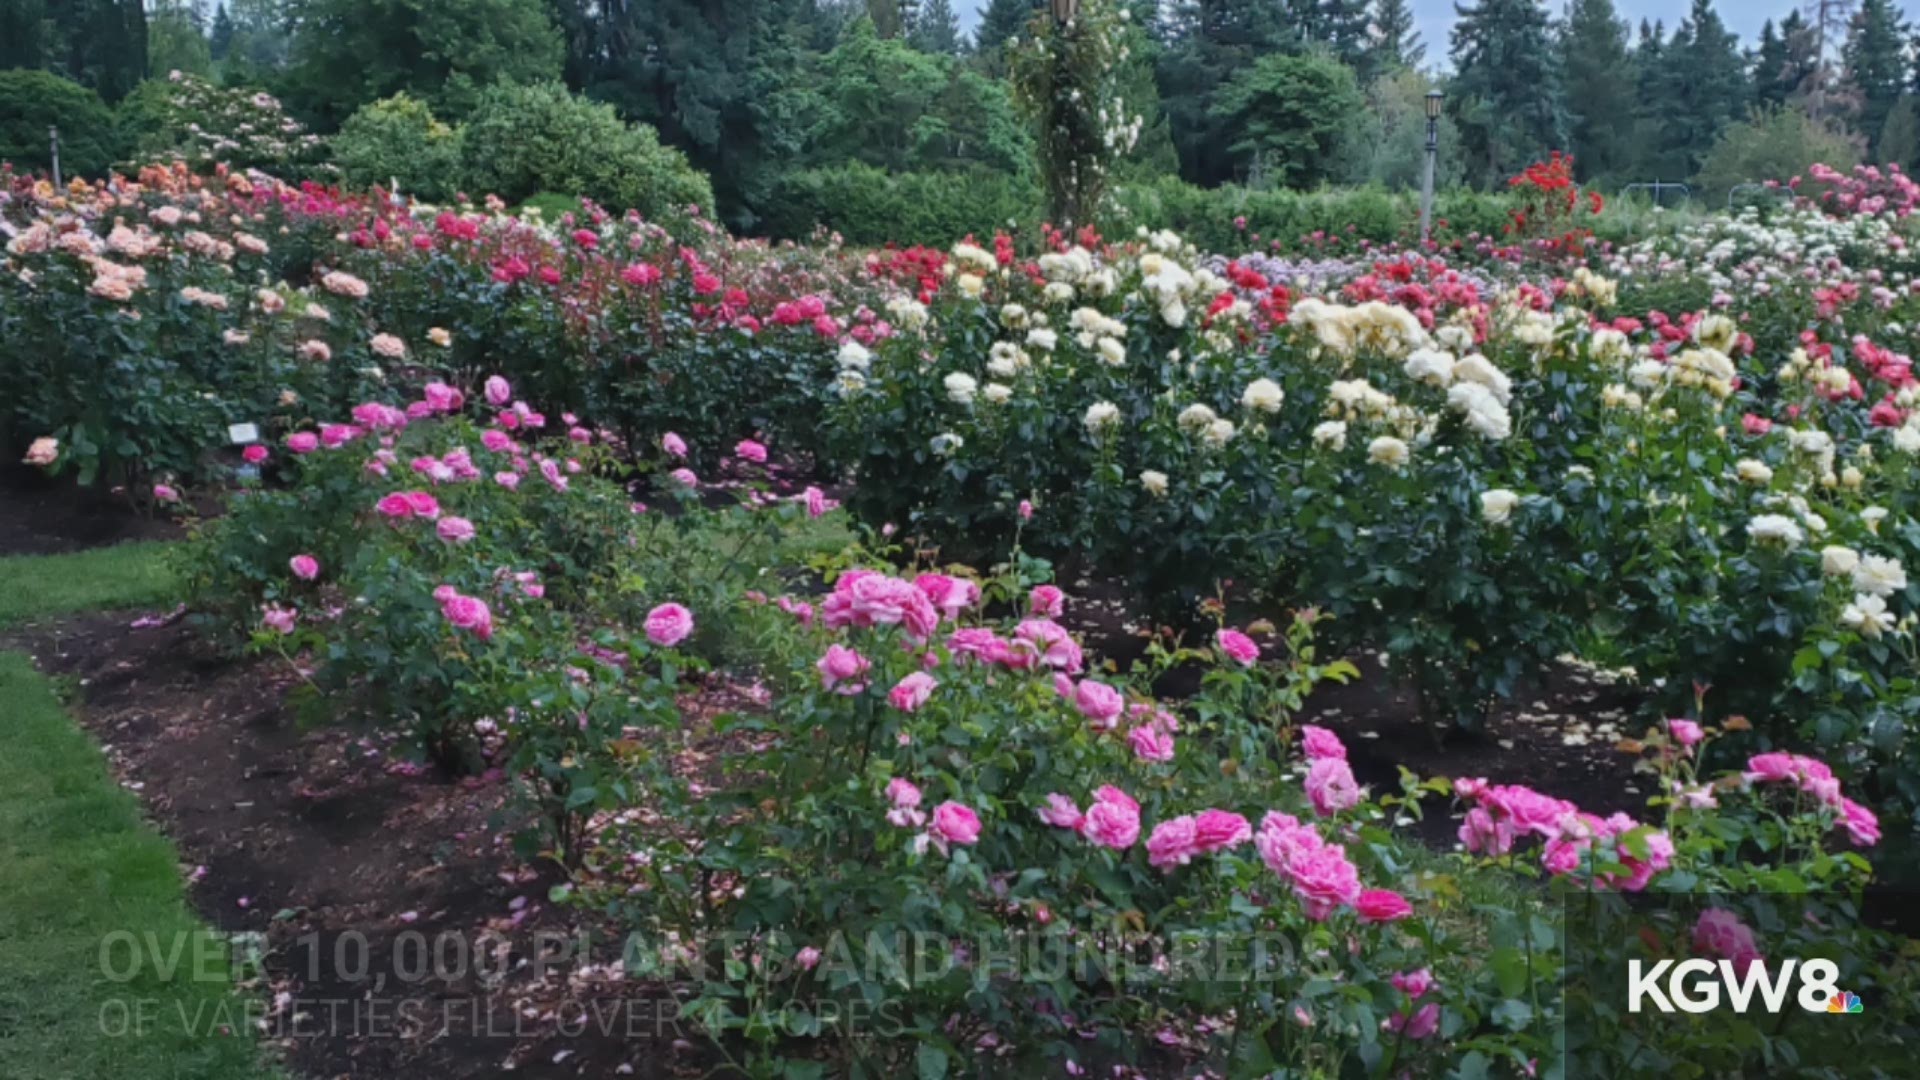 Eric Patterson visits Portland's renowned rose garden.